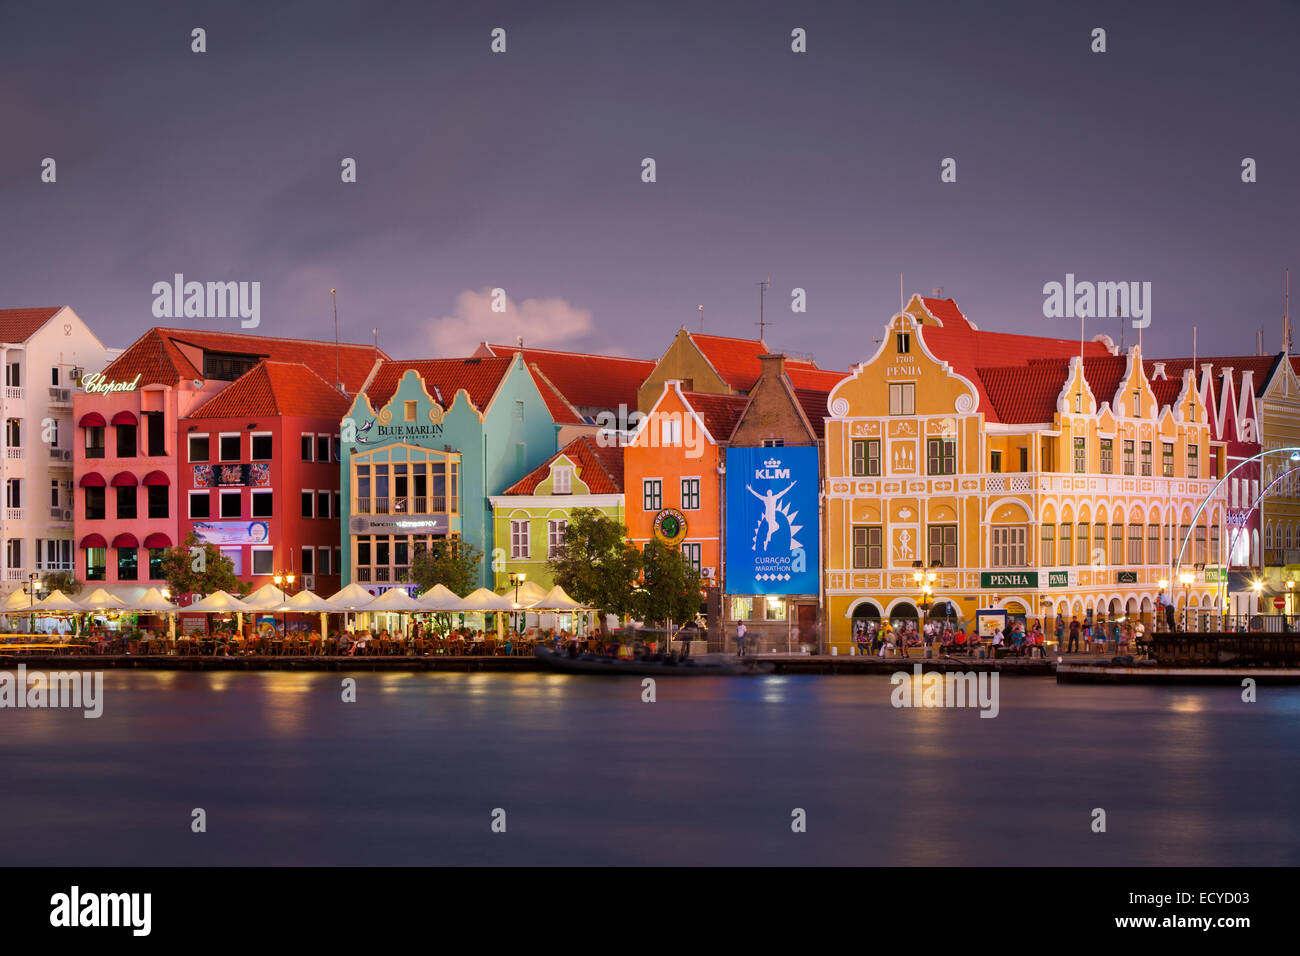 Colorata architettura olandese linee il wharf a Willemstad, Curacao, Antille Foto Stock